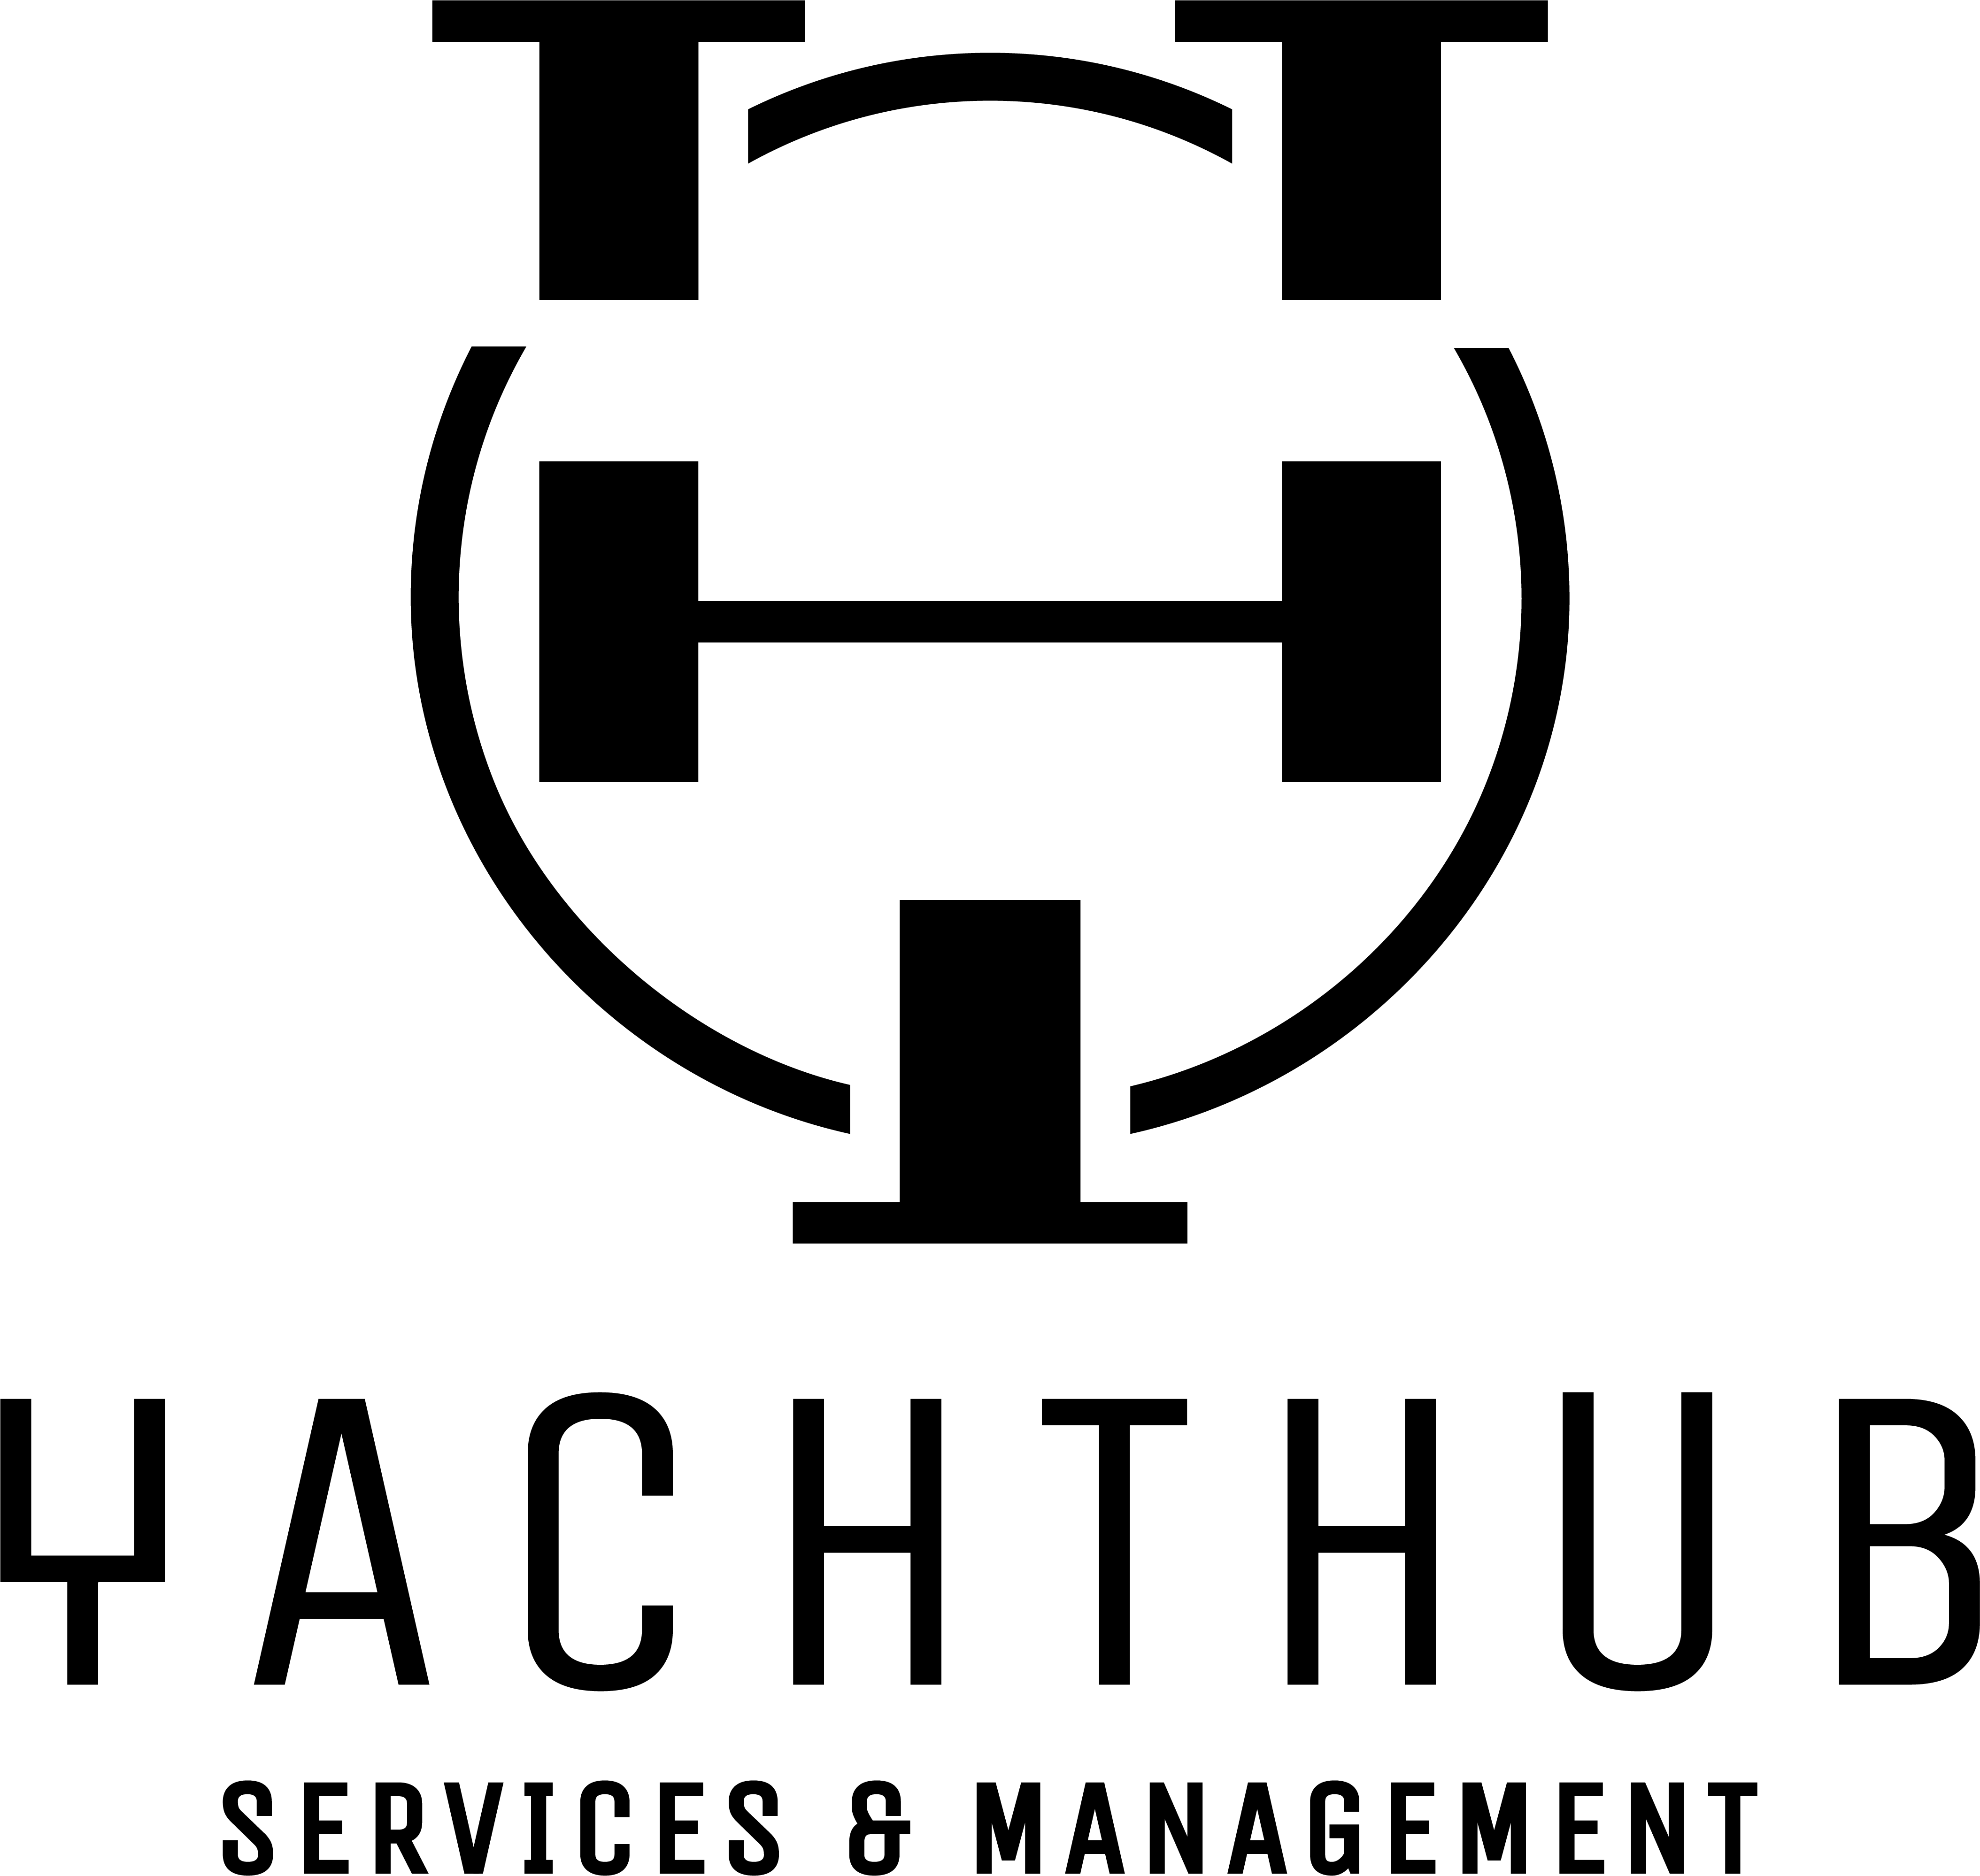 Yachthub Services and Management